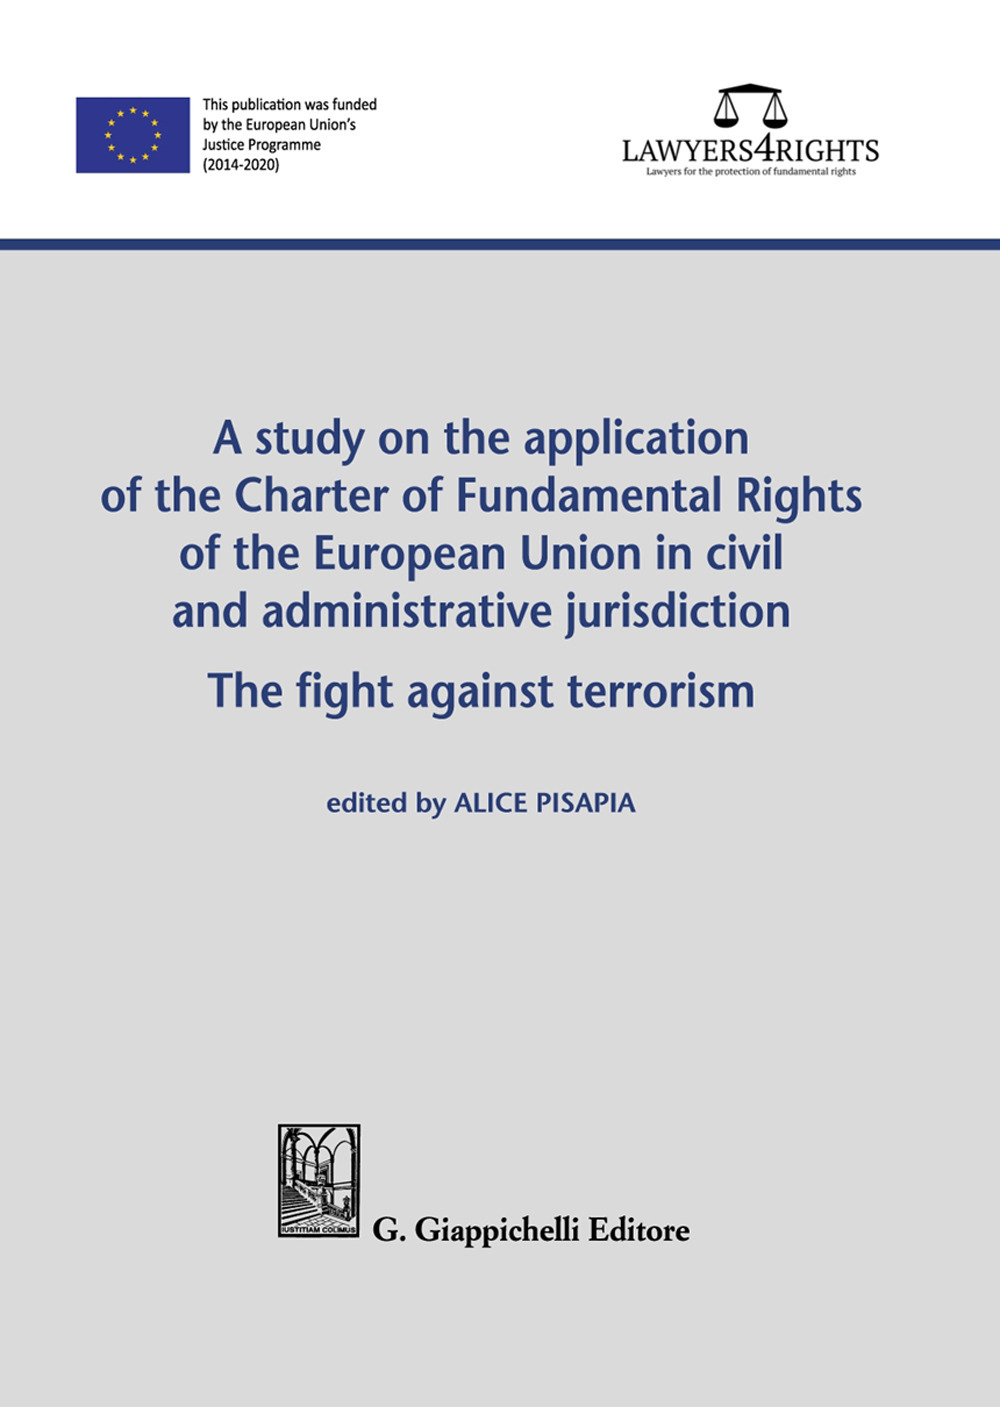 A study on the application of the Charter of Fundamental Rights of European Union in civil and administrative jurisdiction. The fight against terrorism